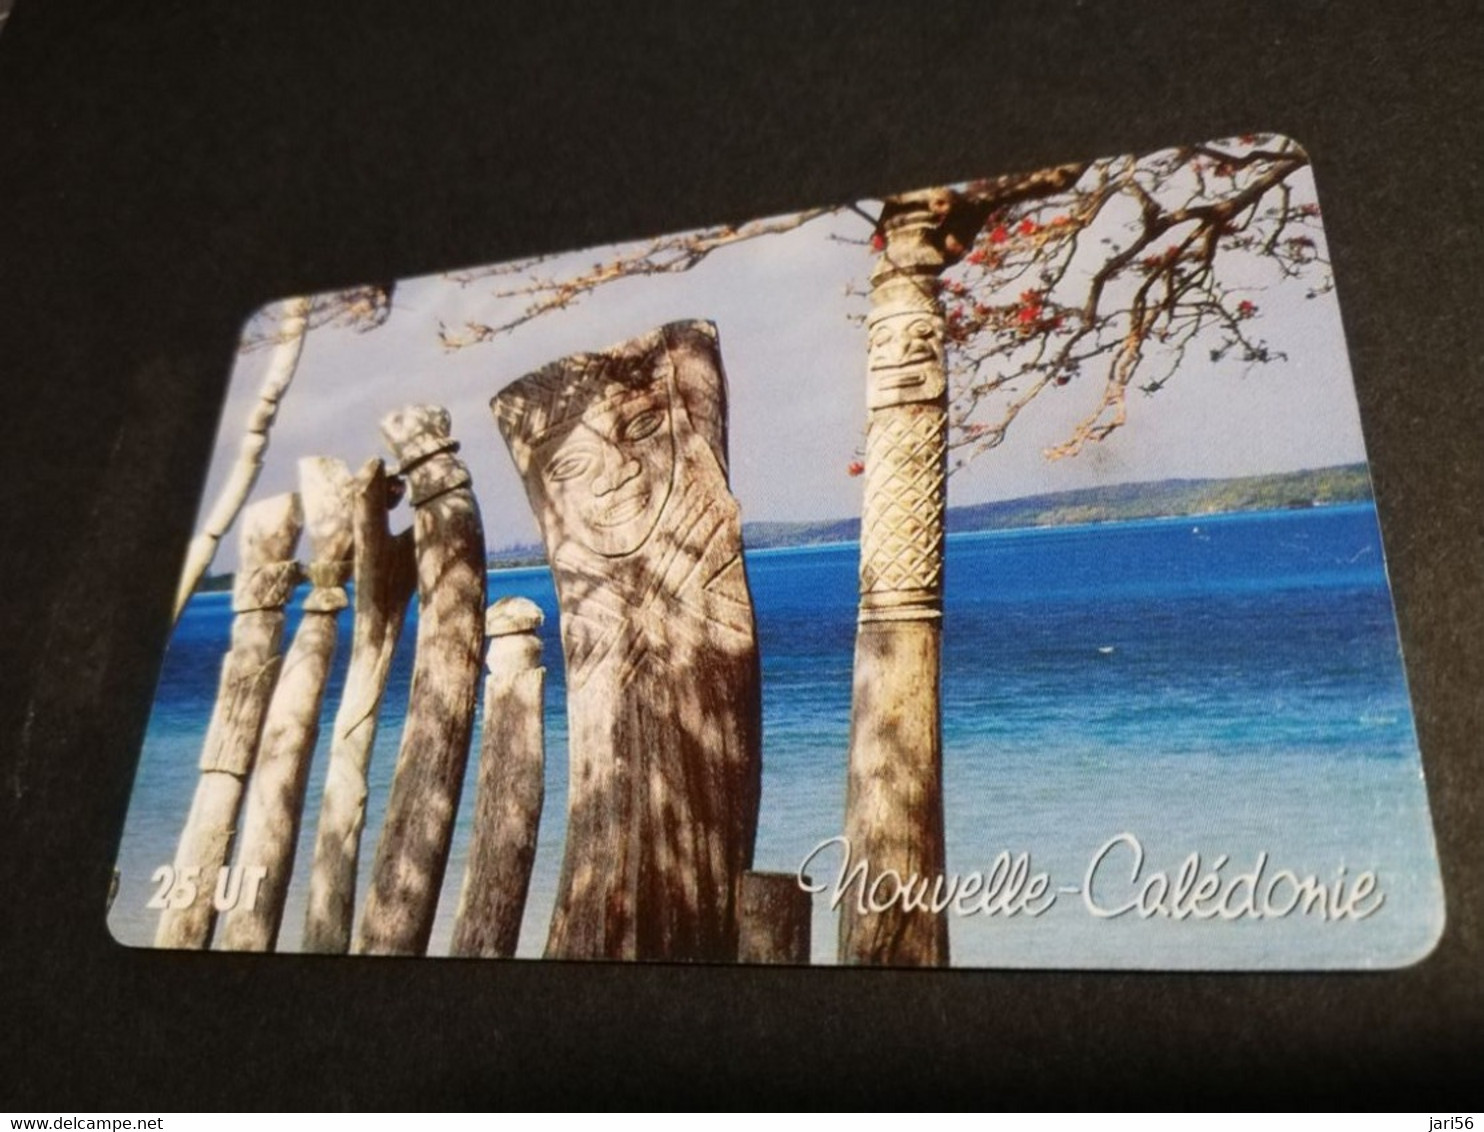 NOUVELLE CALEDONIA  CHIP CARD 25  UNITS  CARVED TREES AT BEACH         ** 4193 ** - Nouvelle-Calédonie